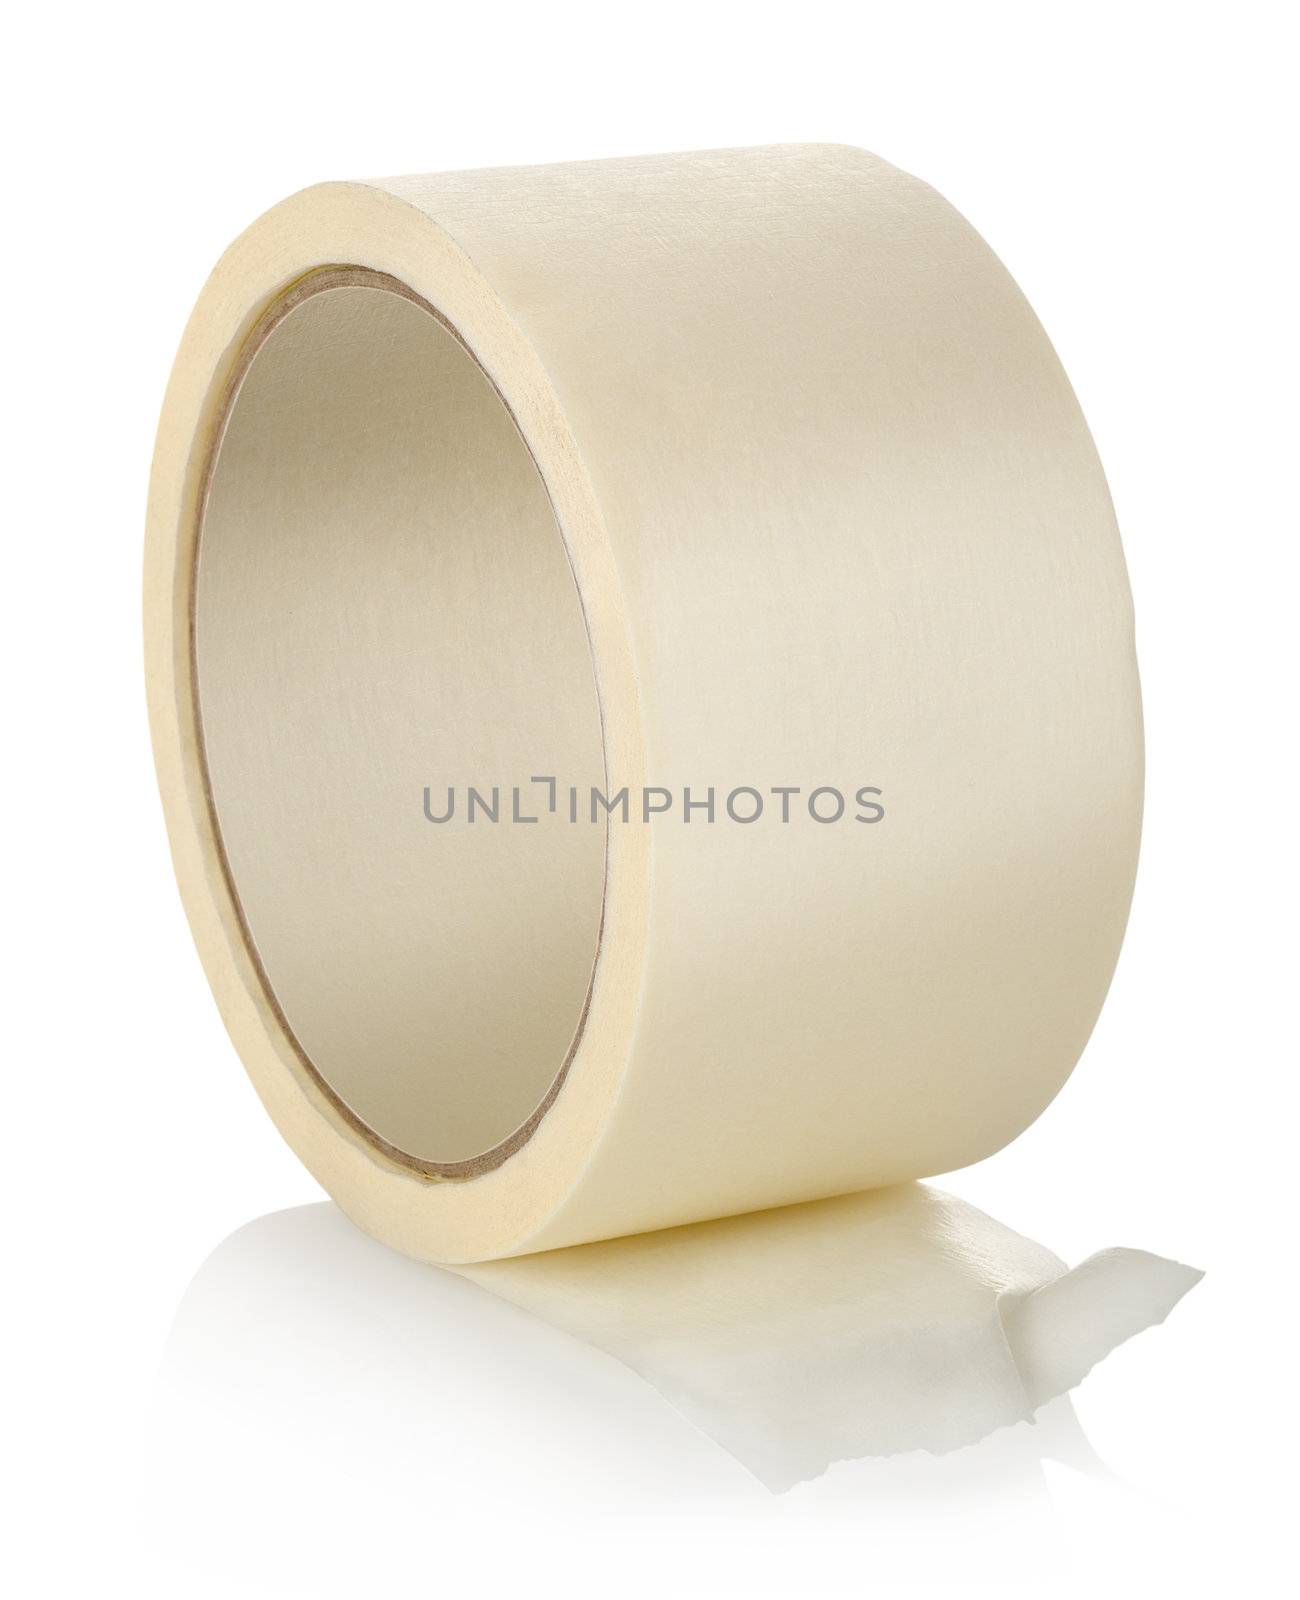 Roll of insulating tape isolated on a white background